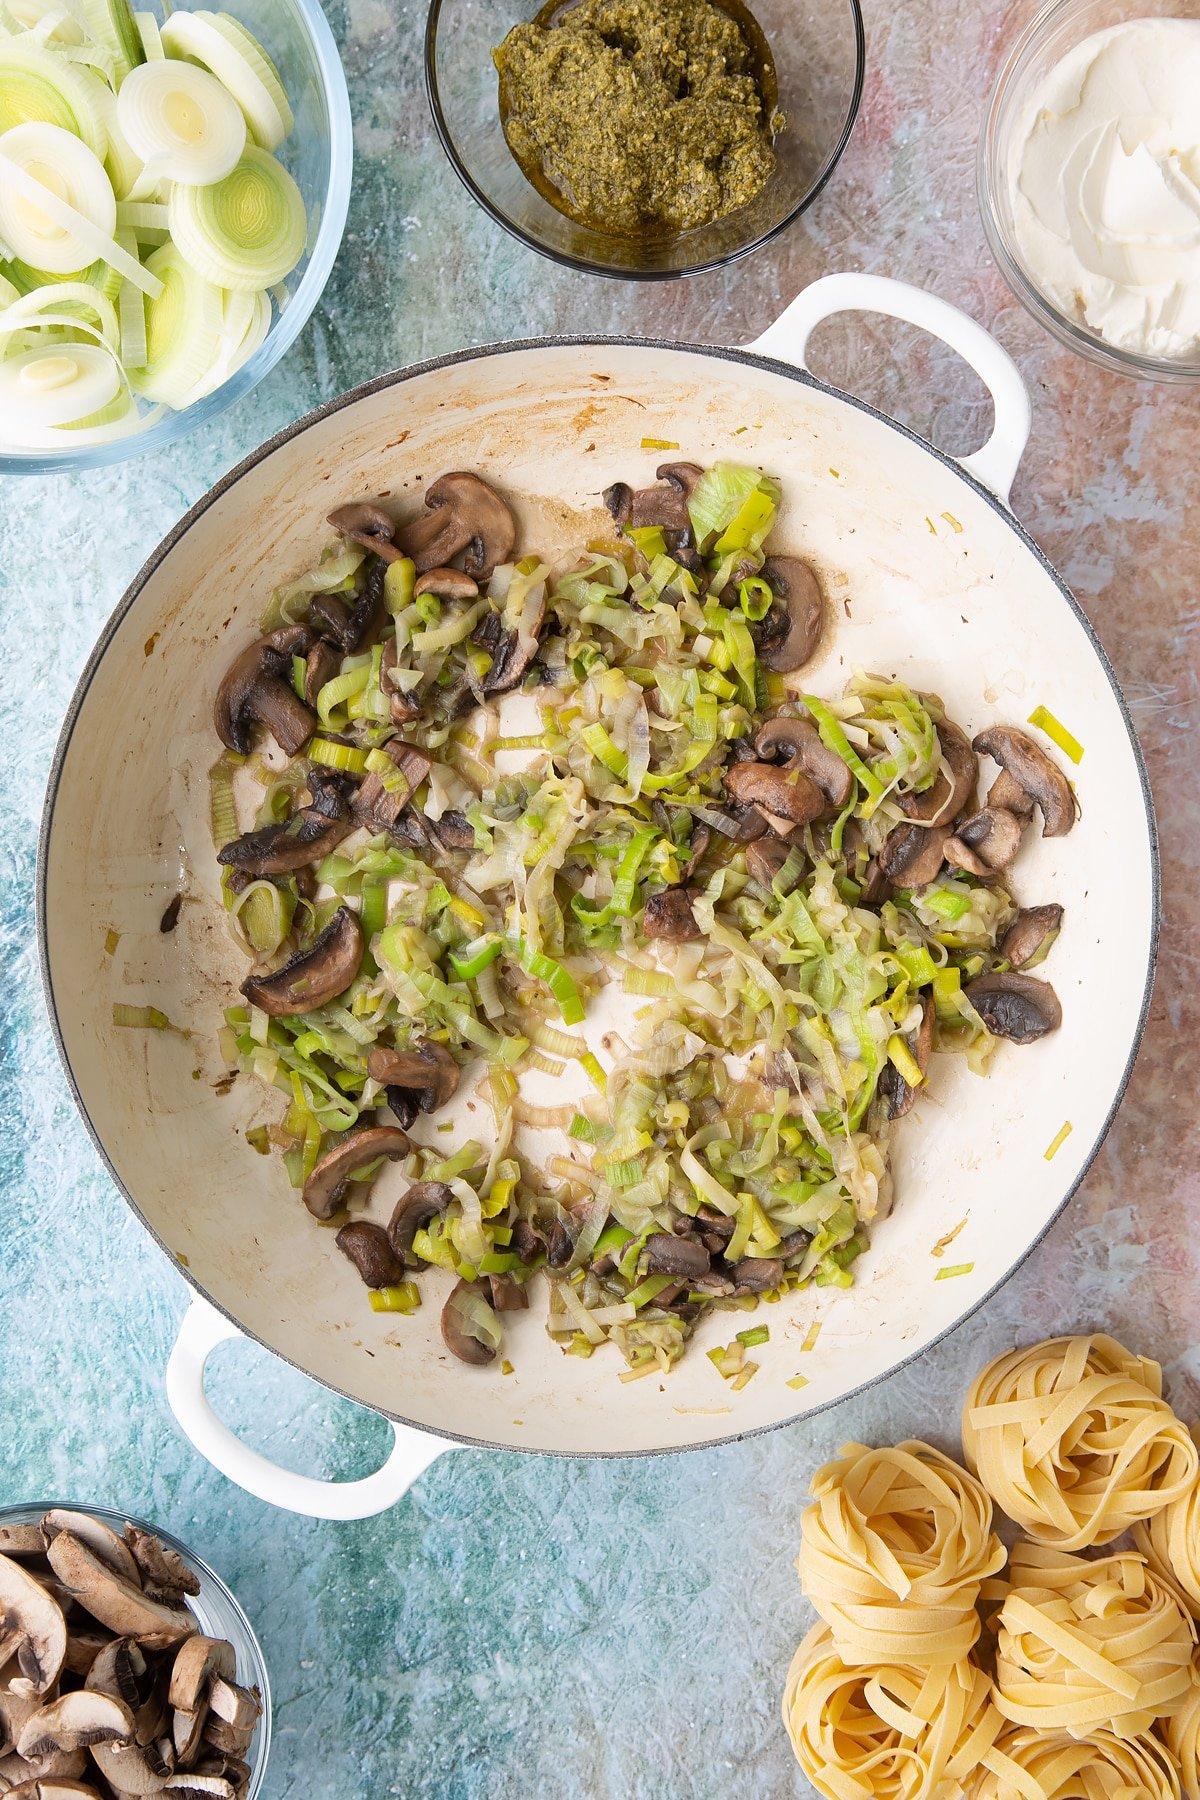 Mixing the softened mushrooms and leeks together in a pan.